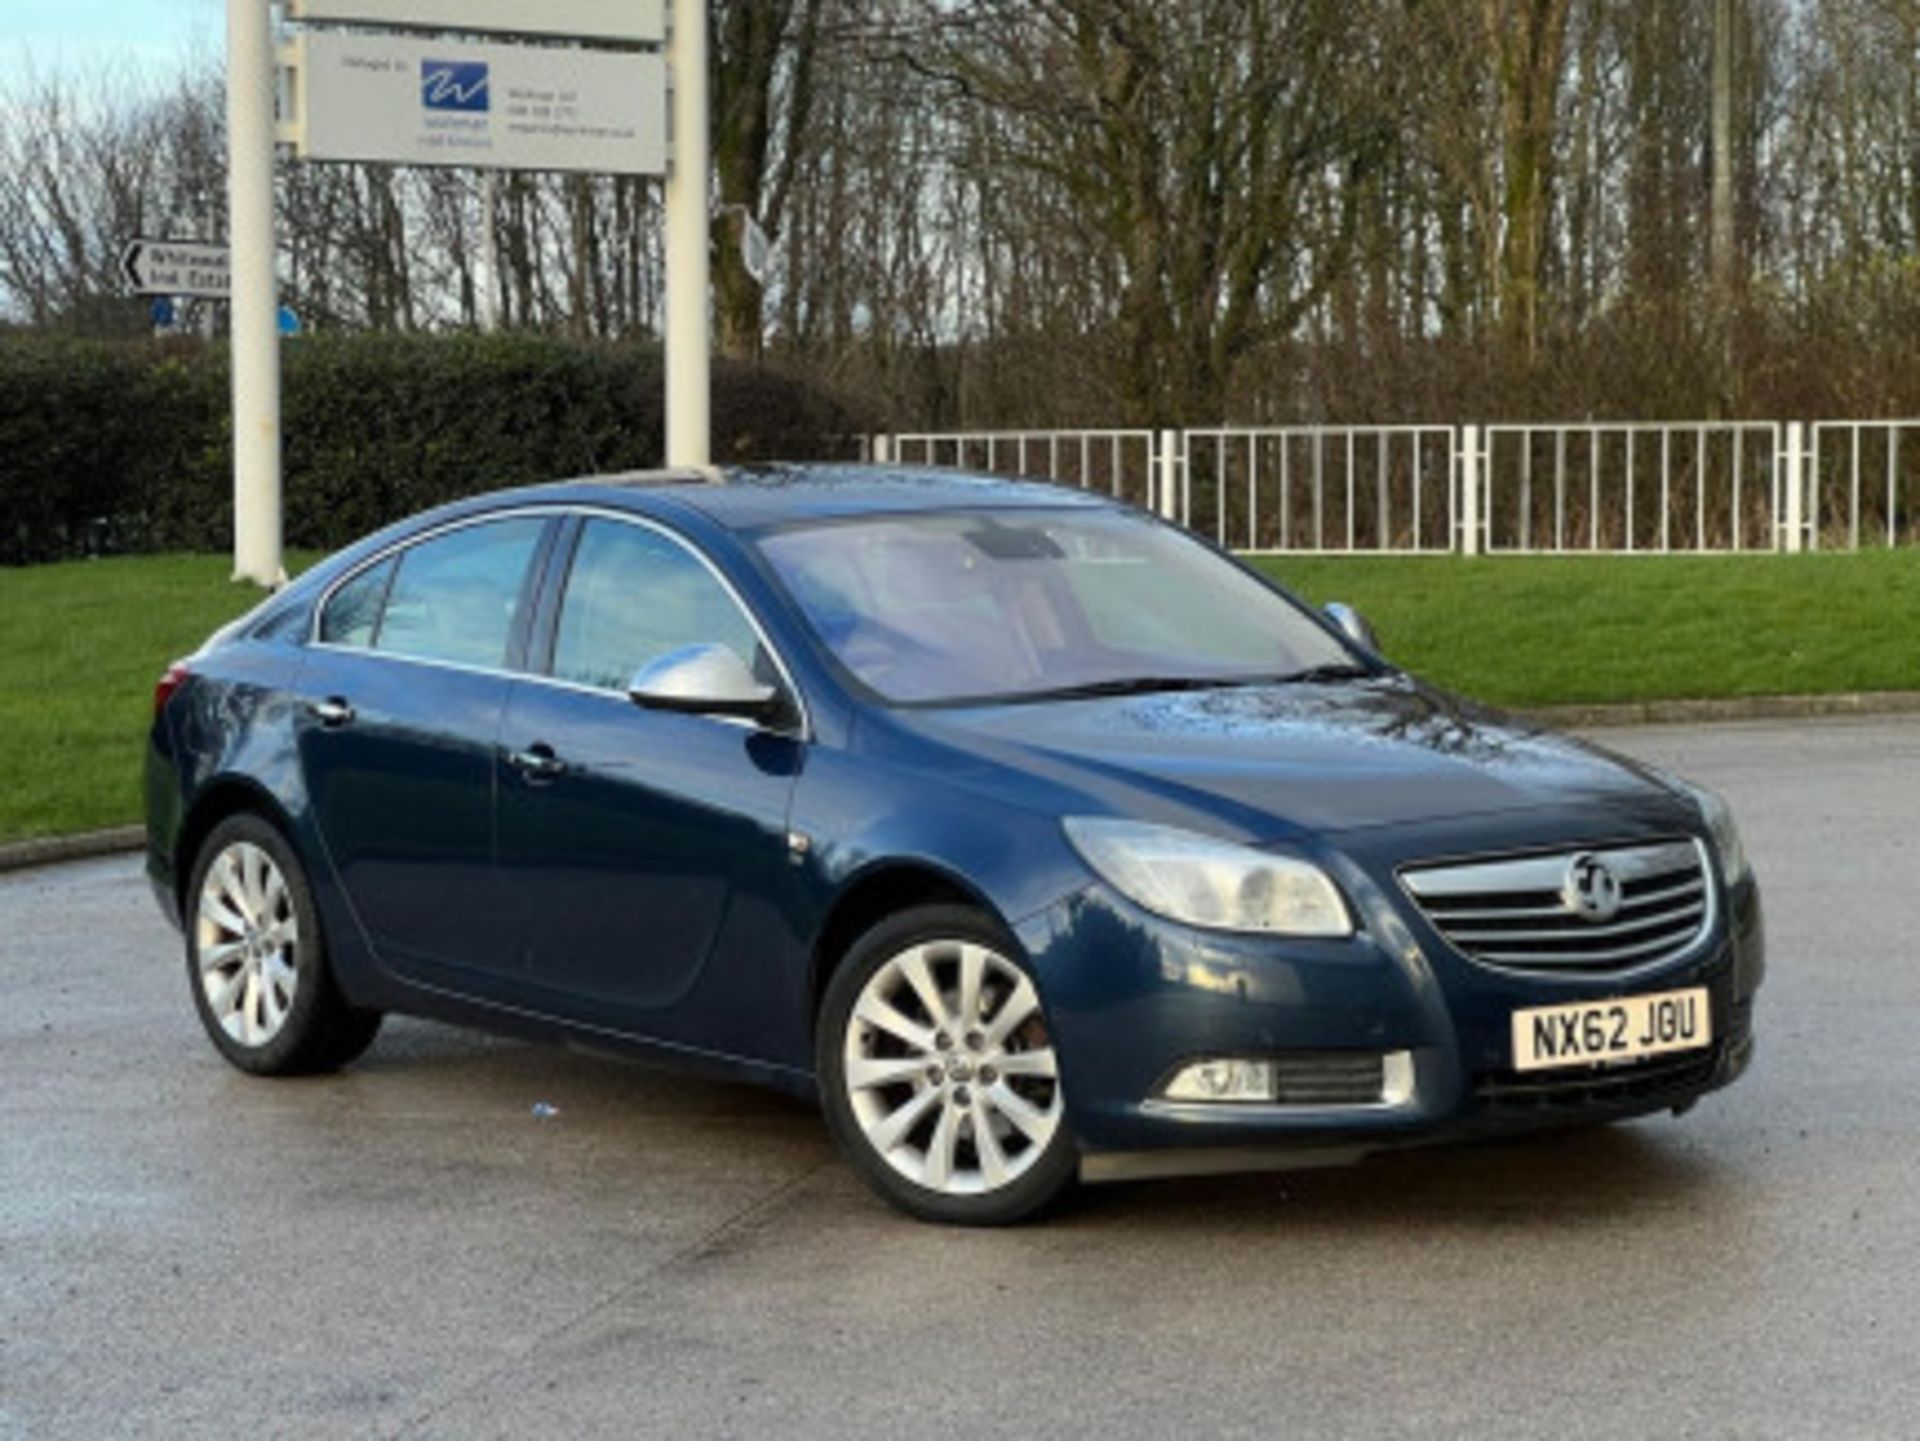 2012 VAUXHALL INSIGNIA 2.0 CDTI ELITE AUTO EURO 5 - DISCOVER EXCELLENCE >>--NO VAT ON HAMMER--<< - Image 35 of 79